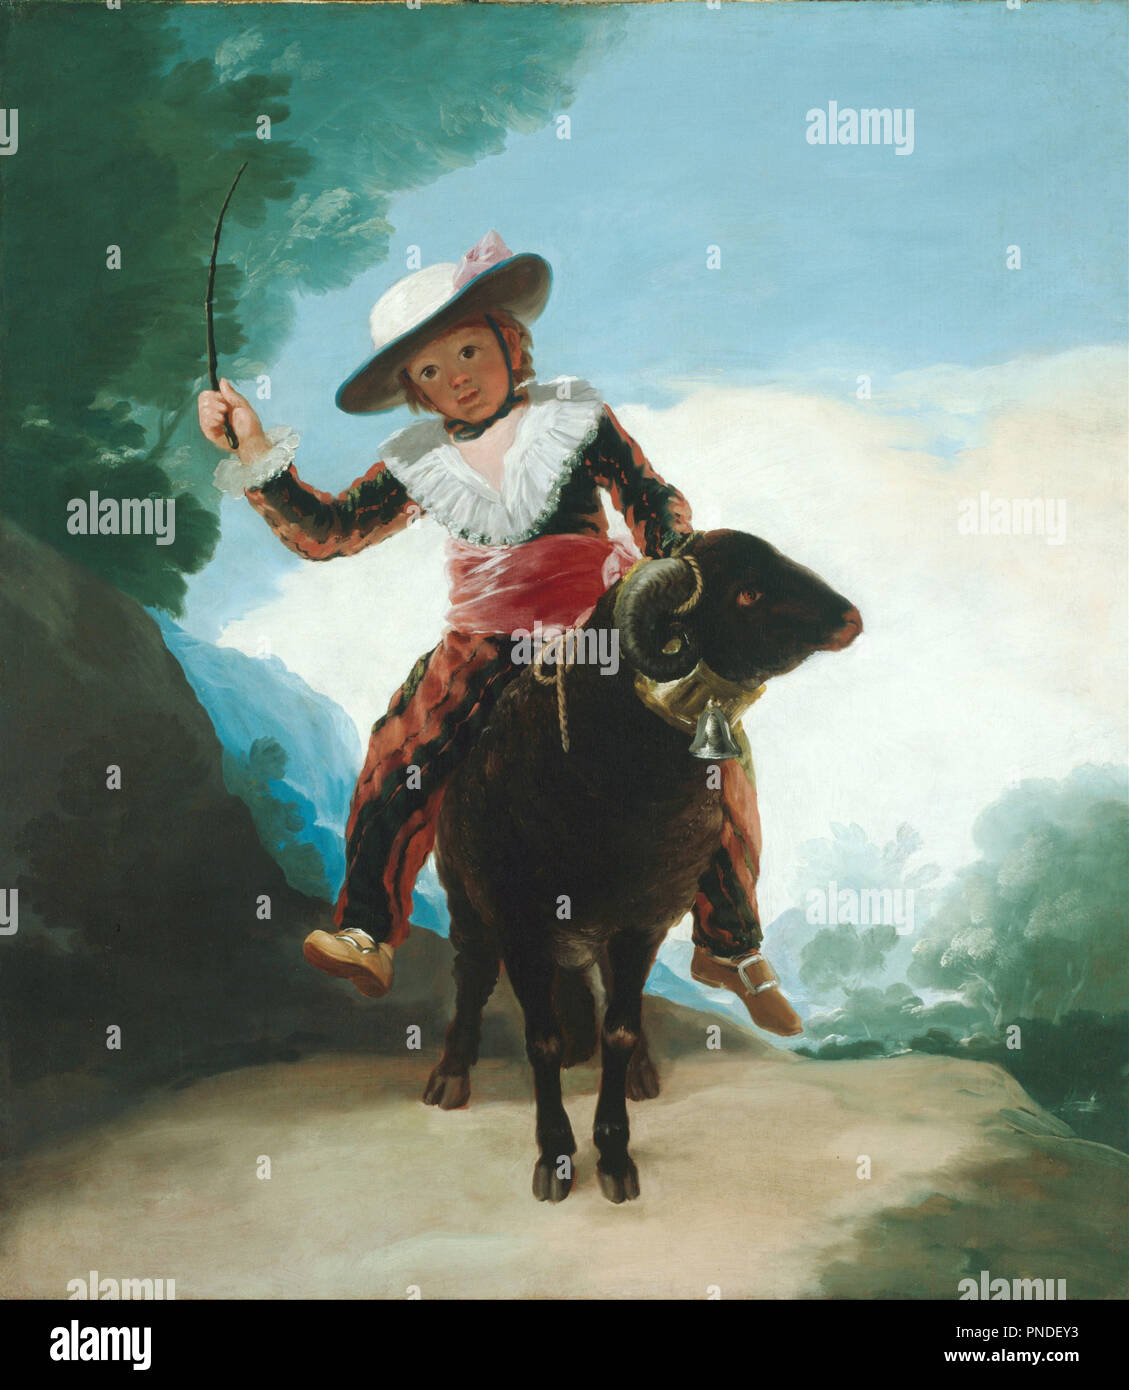 Boy on a Ram. Date/Period: 1786/87. Painting. Oil on canvas. Height: 1,272 mm (50.07 in); Width: 1,121 mm (44.13 in). Author: GOYA, FRANCISCO DE. Stock Photo